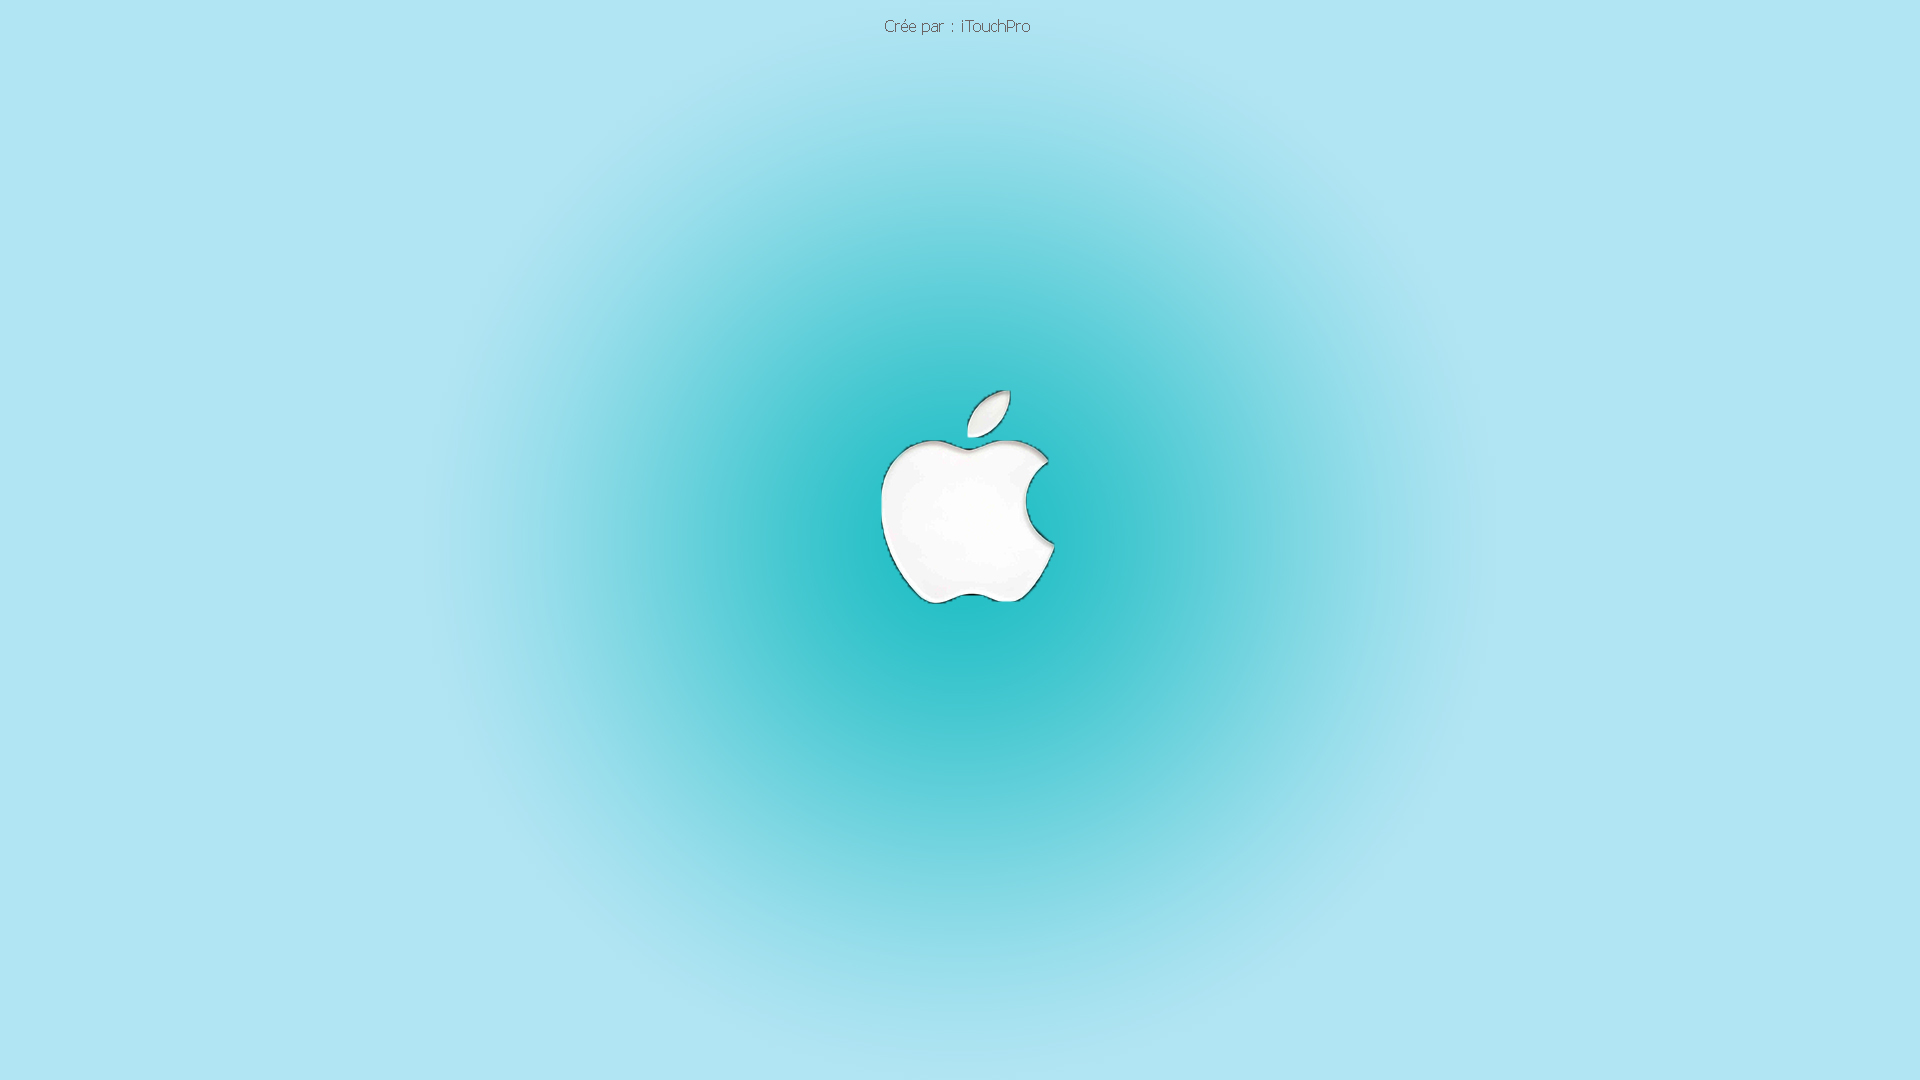 Blue apple wallpaper 1 by itouchpro d5soowh jpg 277984